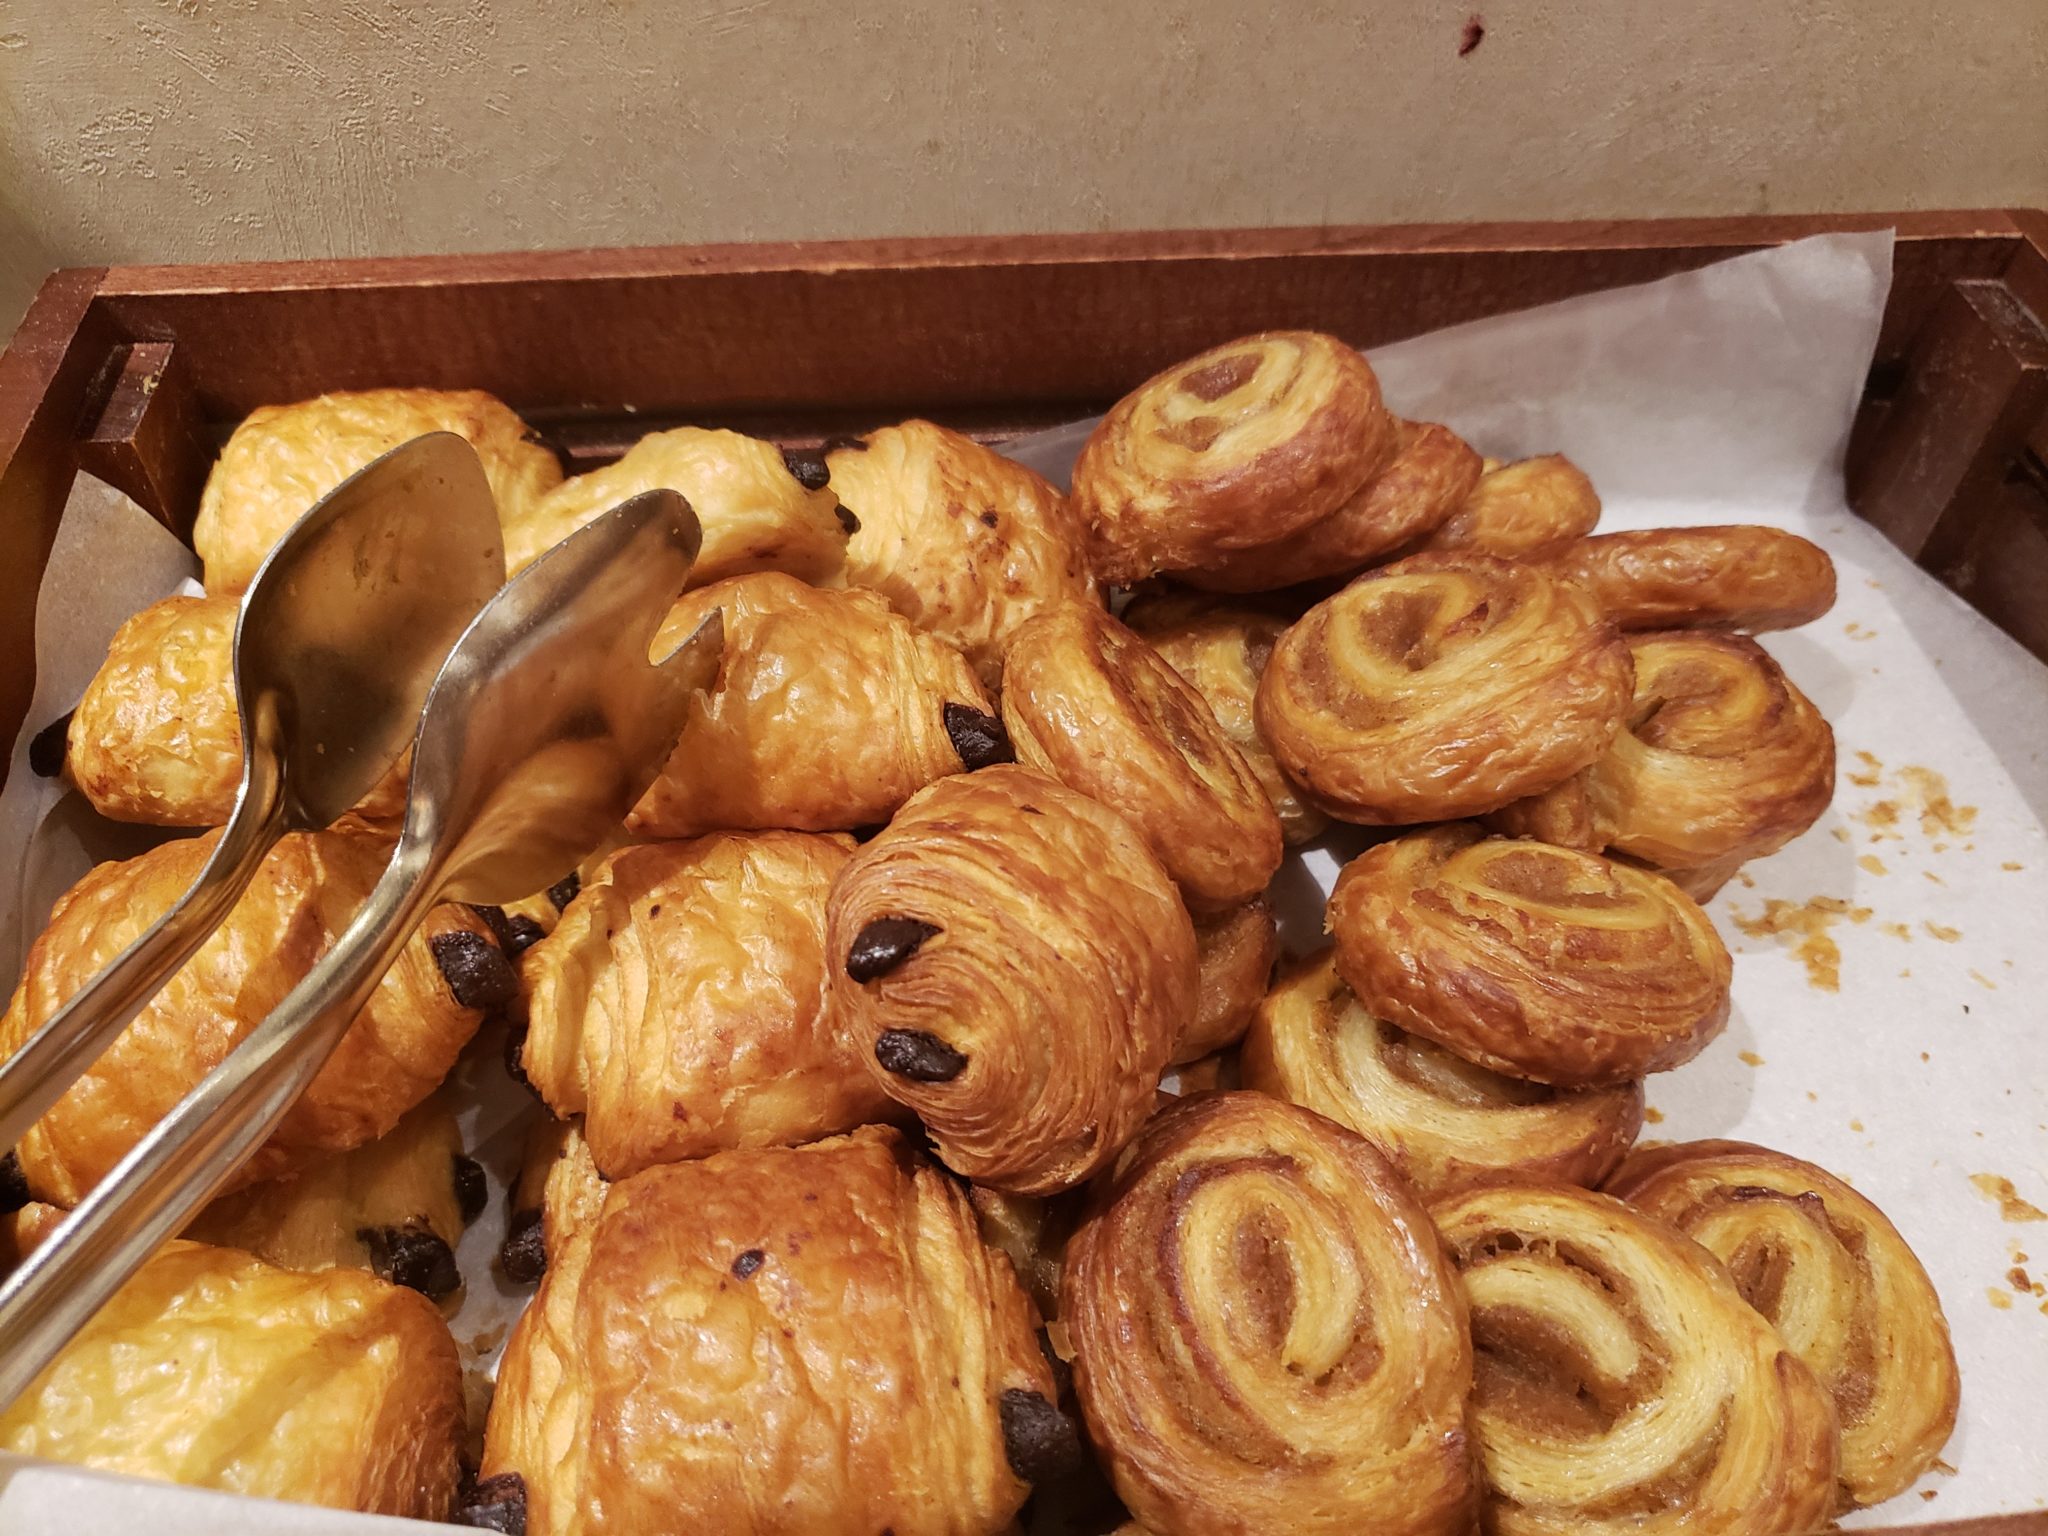 a tray of pastries